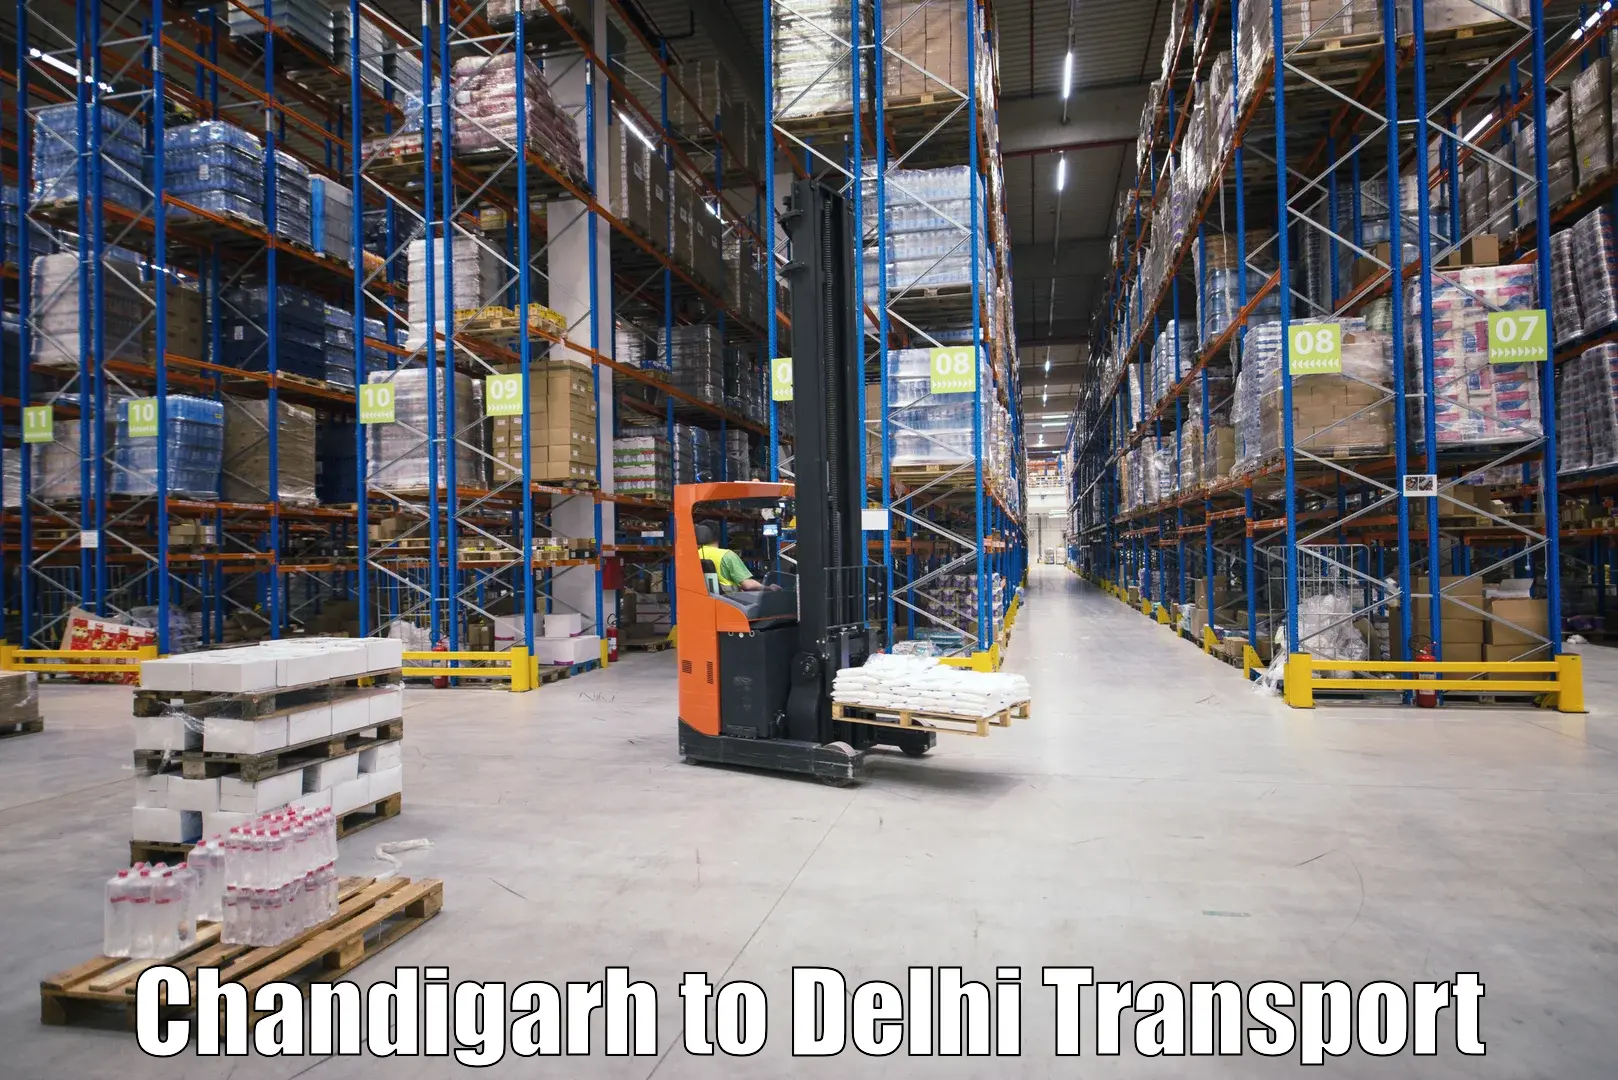 Cargo train transport services Chandigarh to NCR